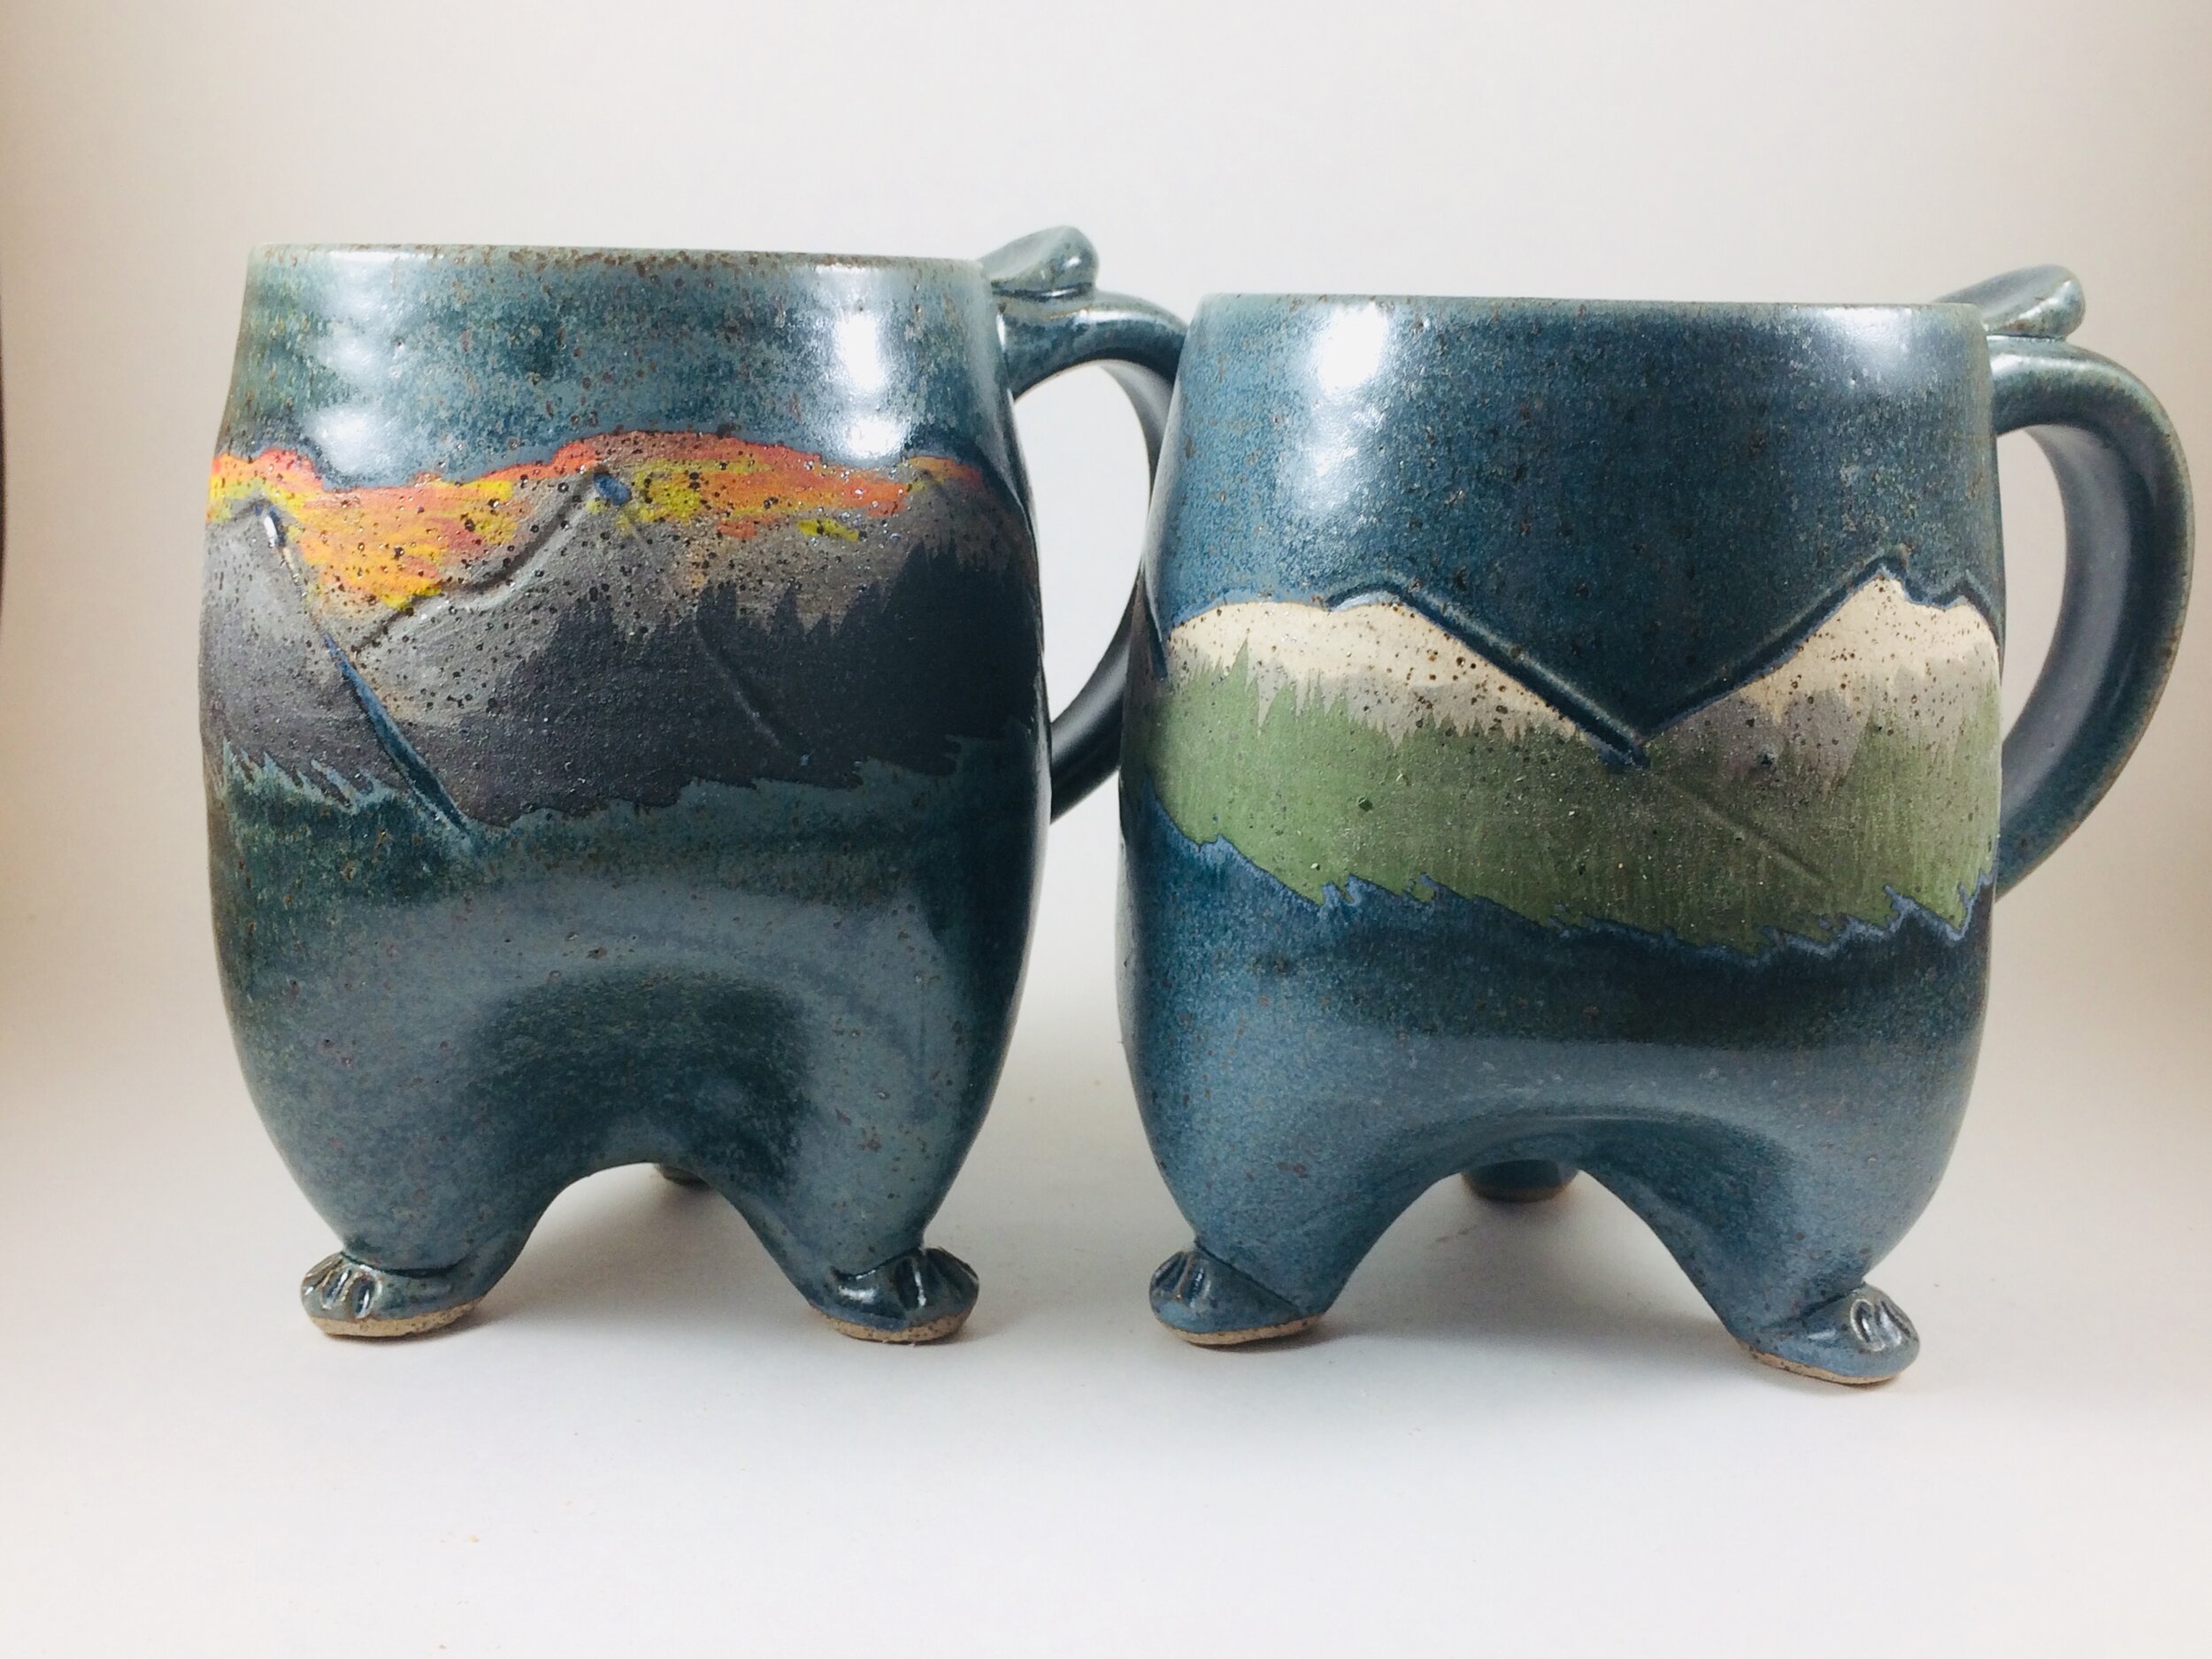 Mountain Pattern footed mugs handcrafted by Michael Gibbons of Nutfield Pottery, Derry, NH, USA